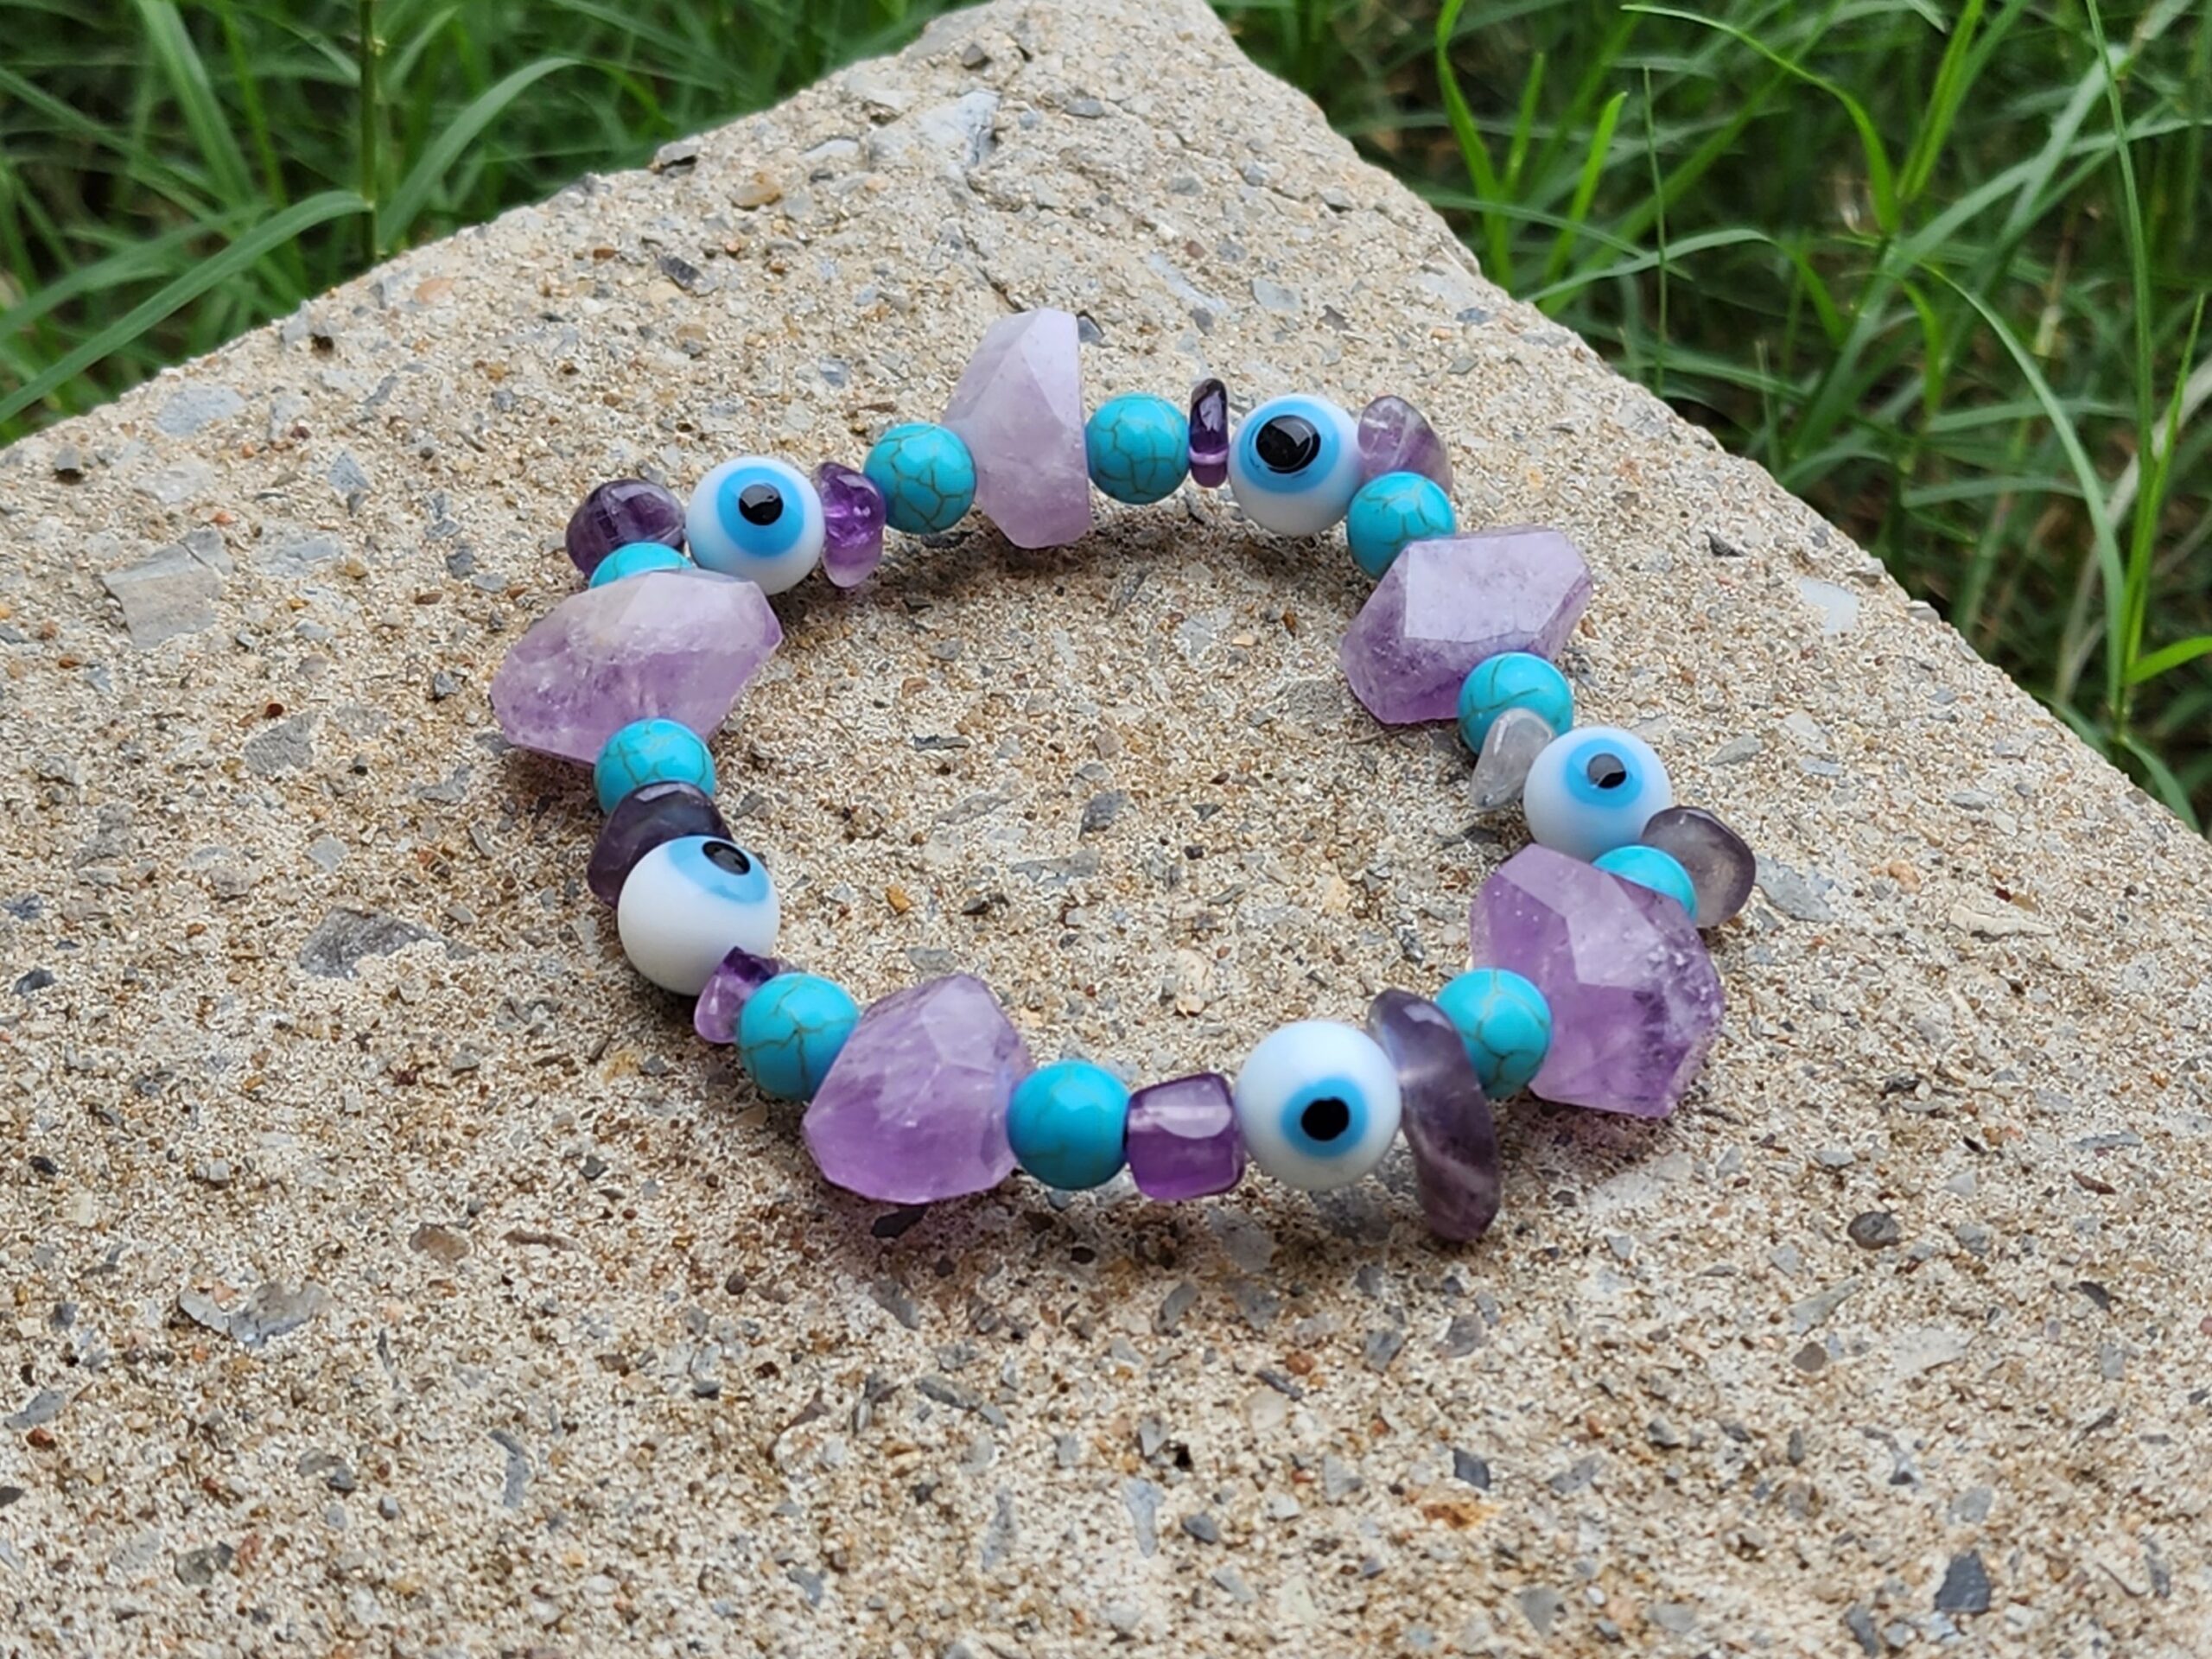 Handcrafted bracelets made with amethyst, turquoise, and evil eye beads.